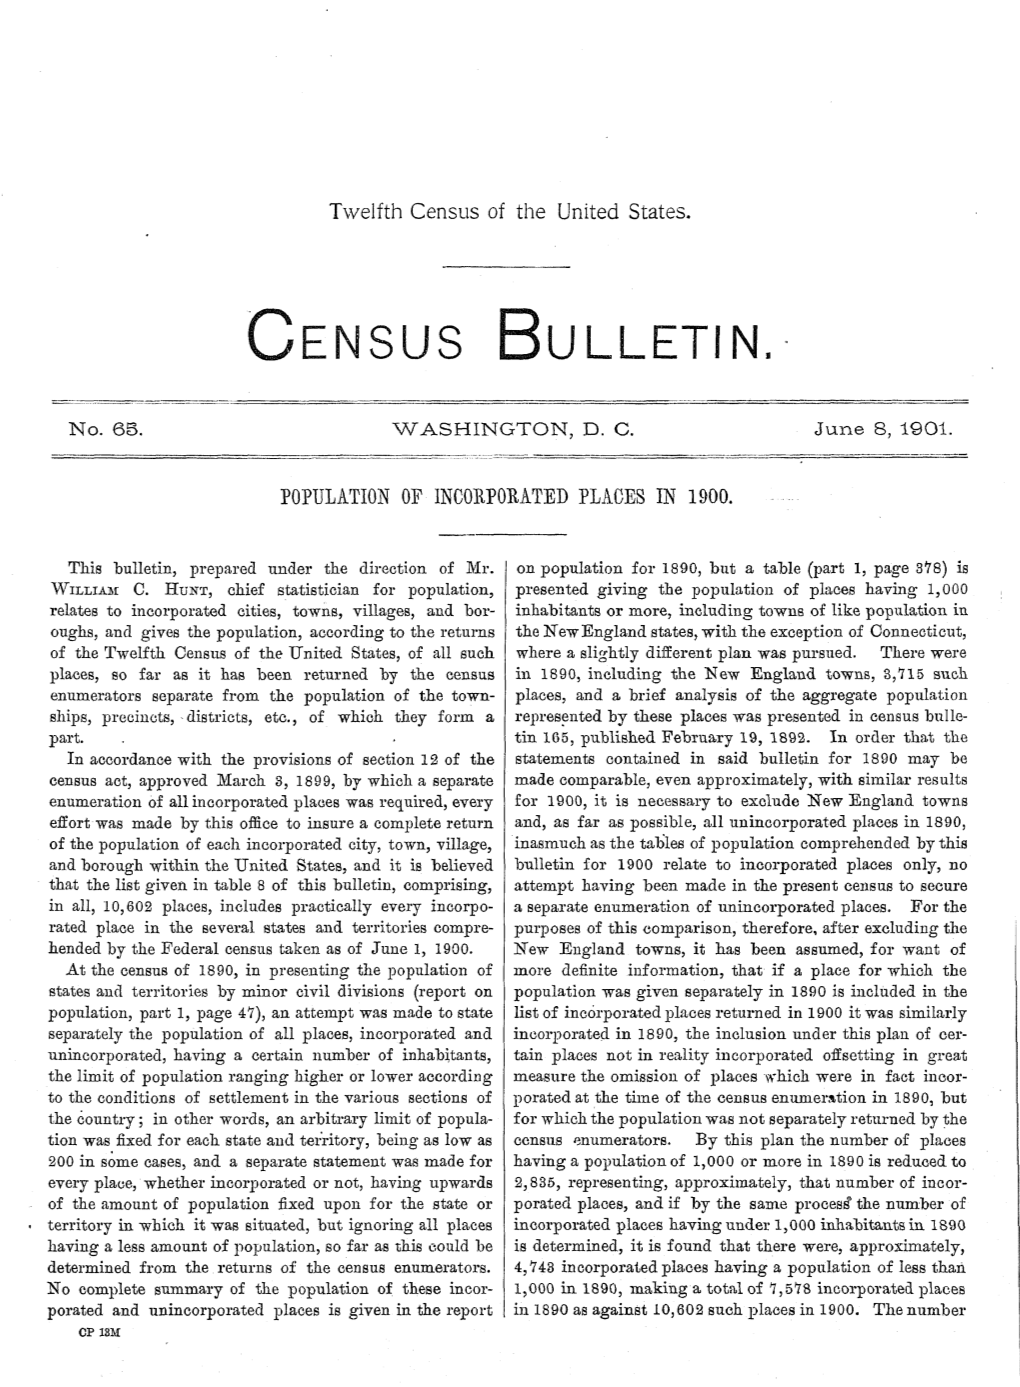 Bulletin 65. Population of Incorporated Places in 1900